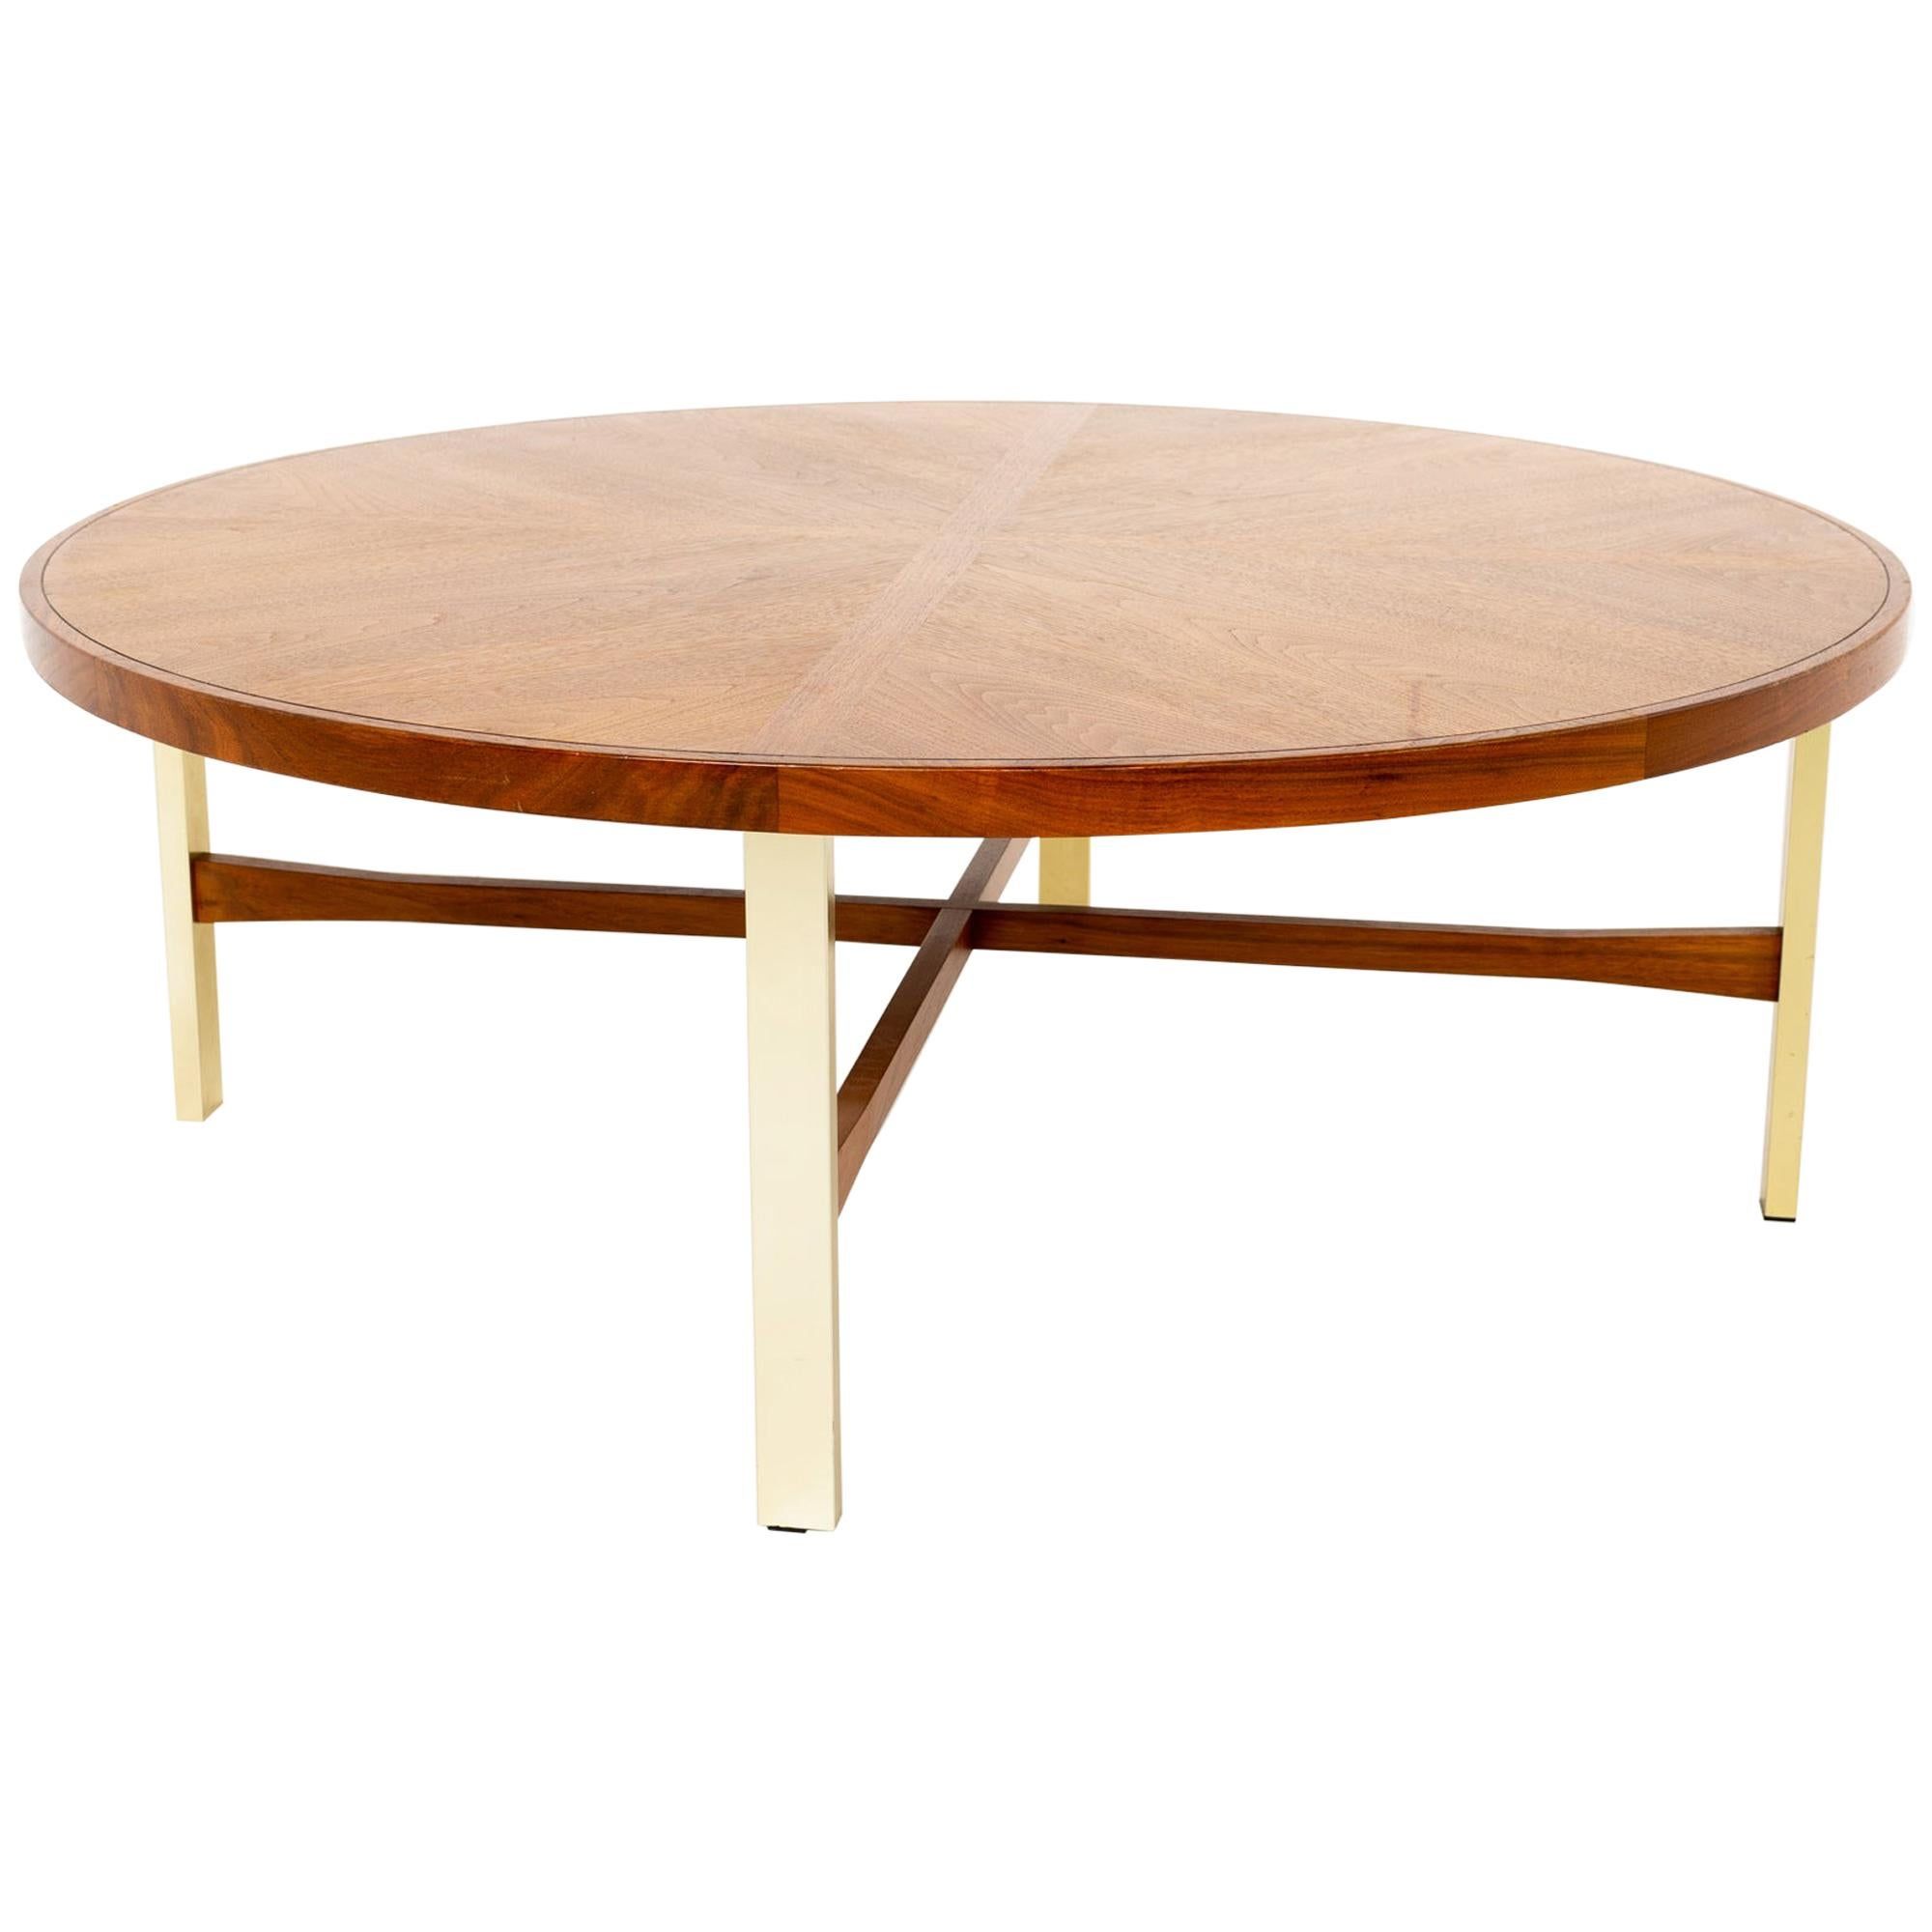 Drexel Heritage Mid Century Walnut And Brass Round Coffee Table At 1stdibs With American Heritage Round Coffee Tables (View 15 of 15)